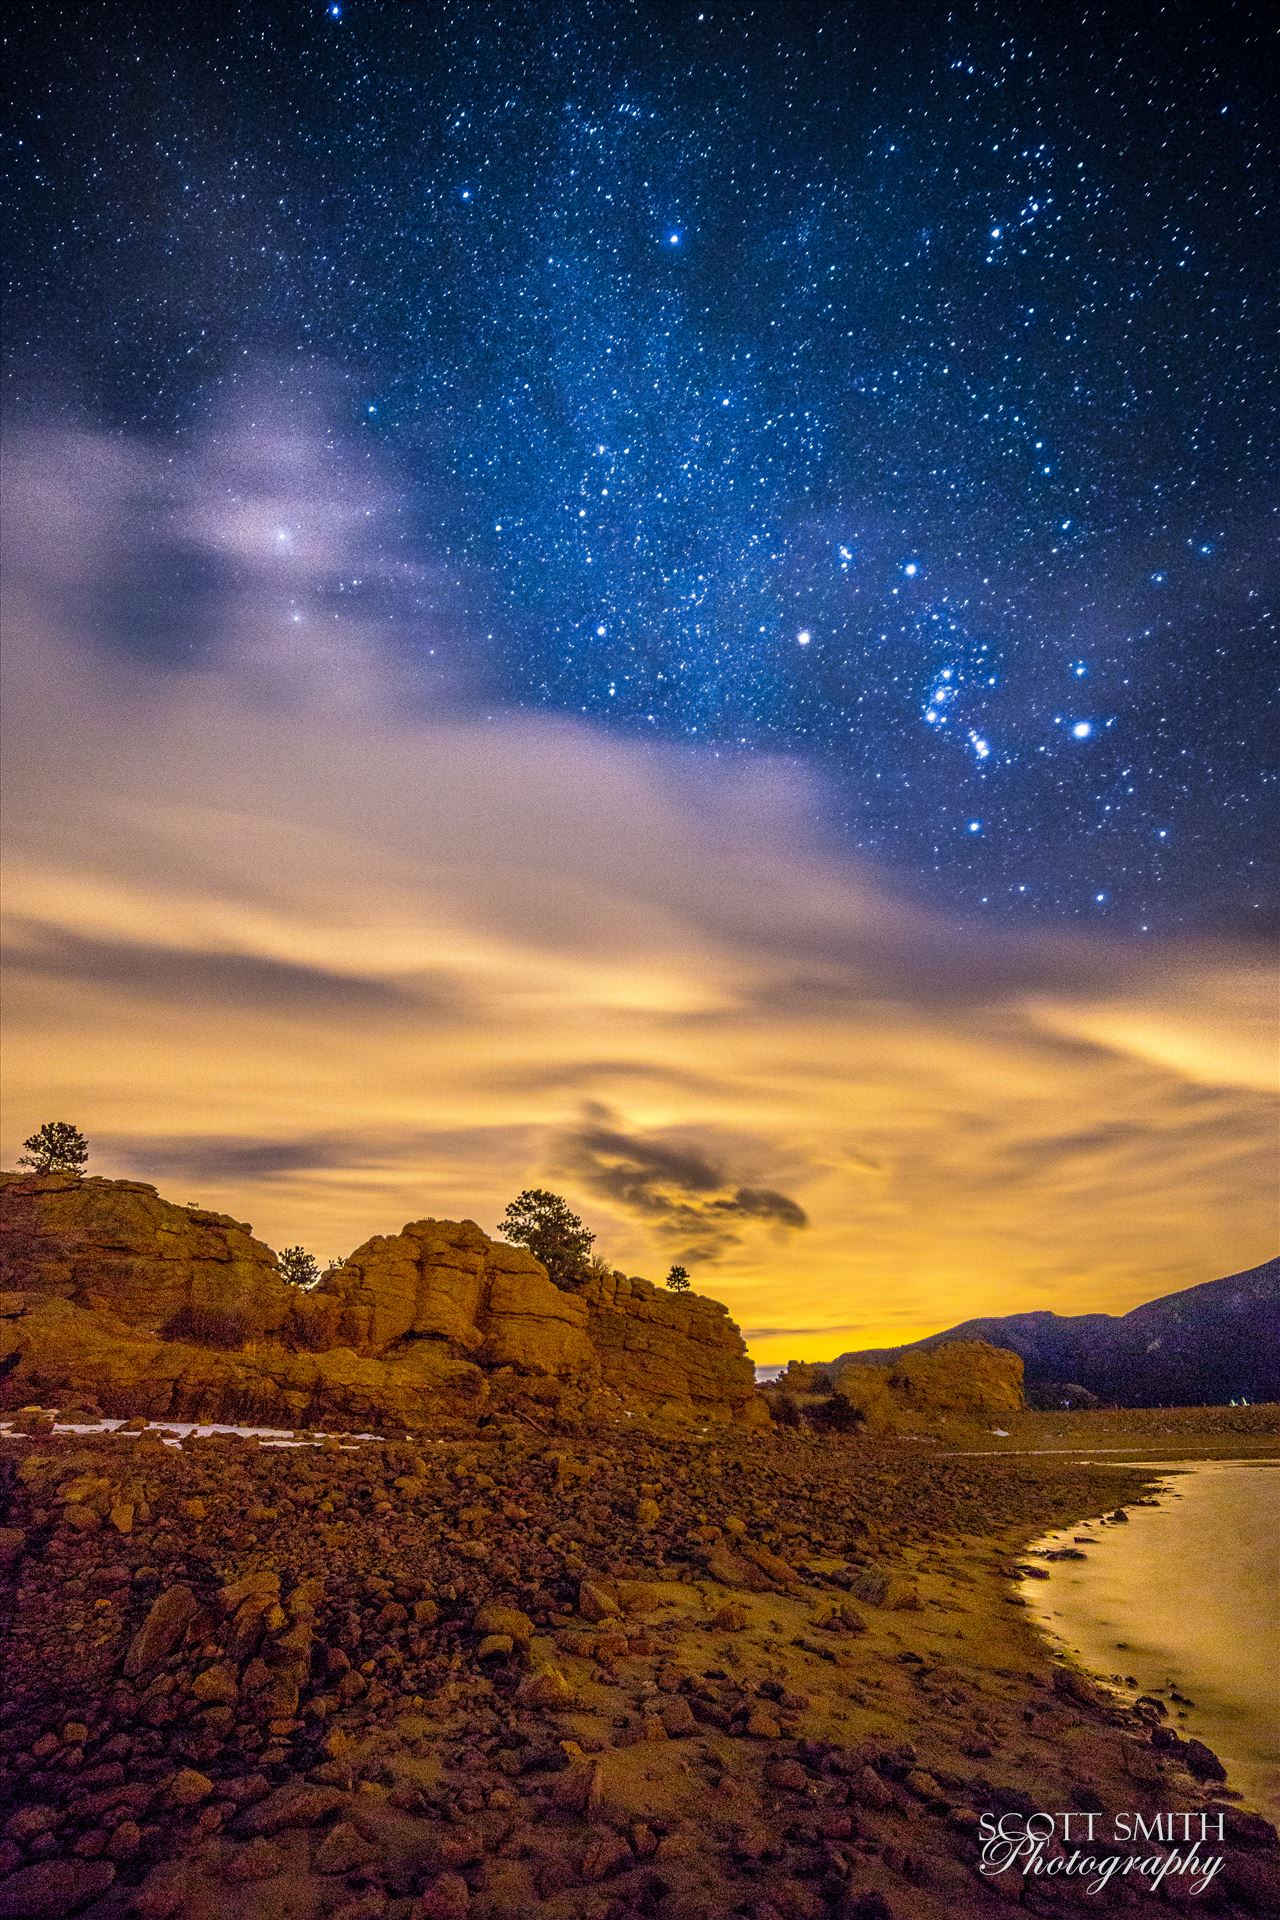 Mary's Lake At Night 2 - The milky way just manages to peek through the clouds, over Mary's Lake near Estes Park, Colorado. by Scott Smith Photos